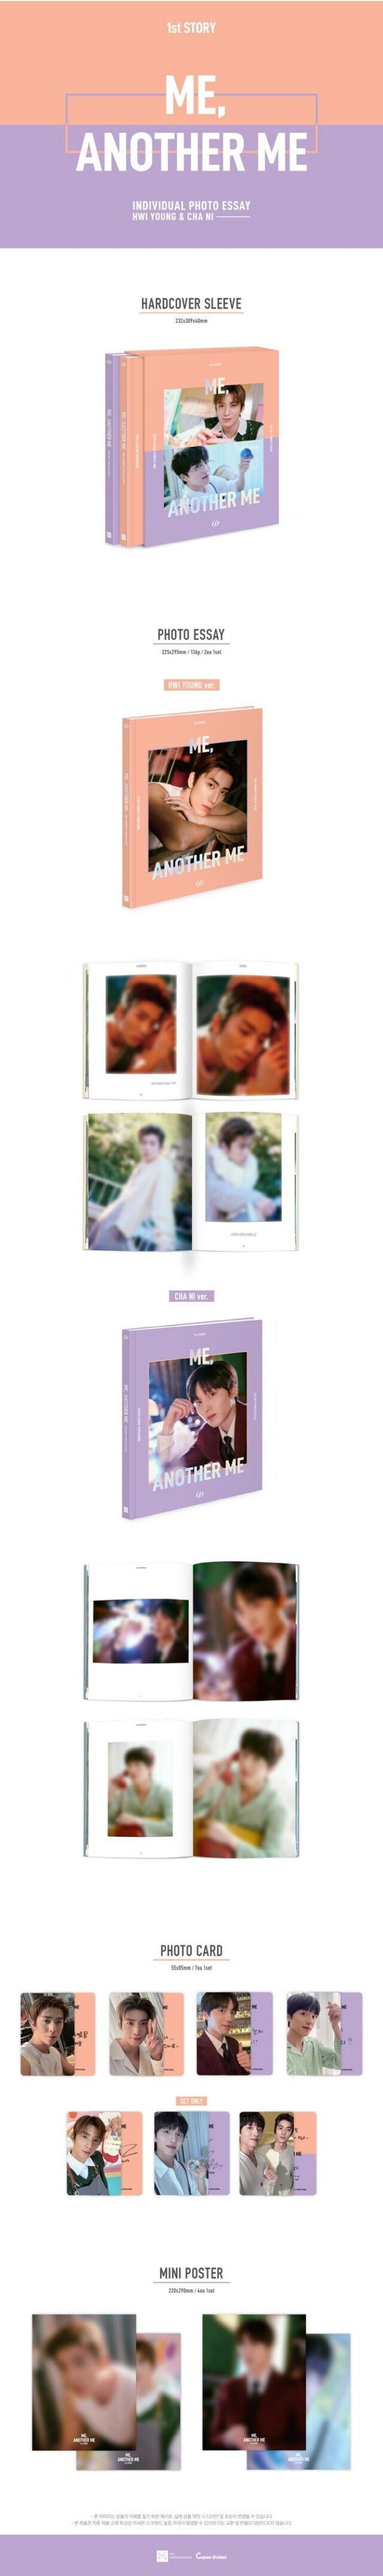 [PREORDER] SF9 - SF9 HWI YOUNG & CHA NI'S PHOTO ESSAY ME, ANOTHER ME